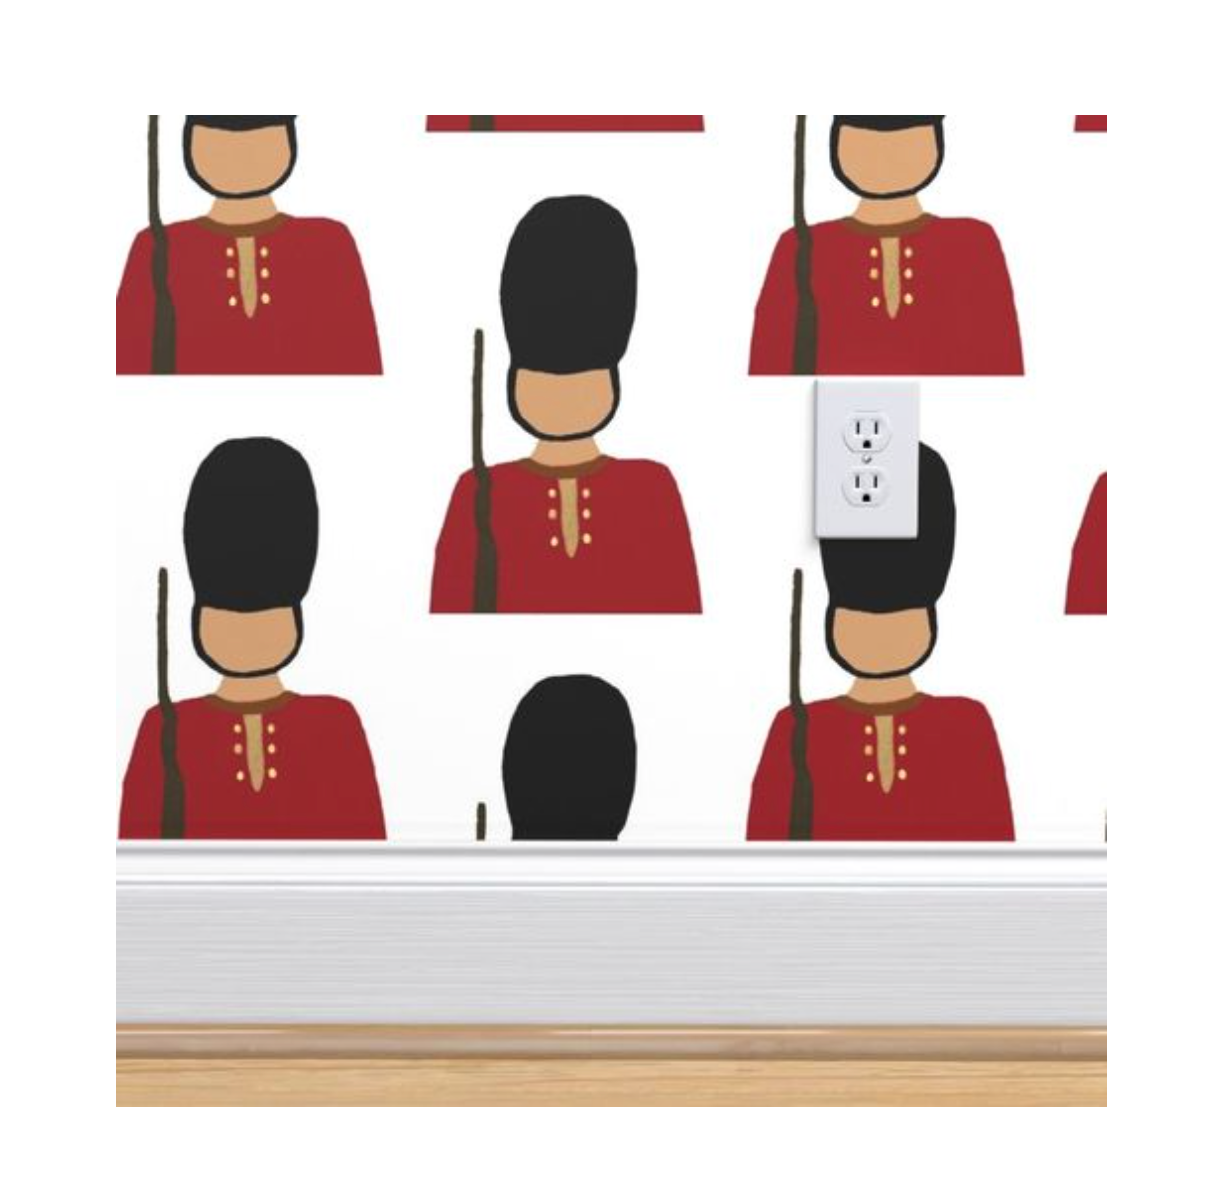 Iconically British - Queens Guard Wallpaper